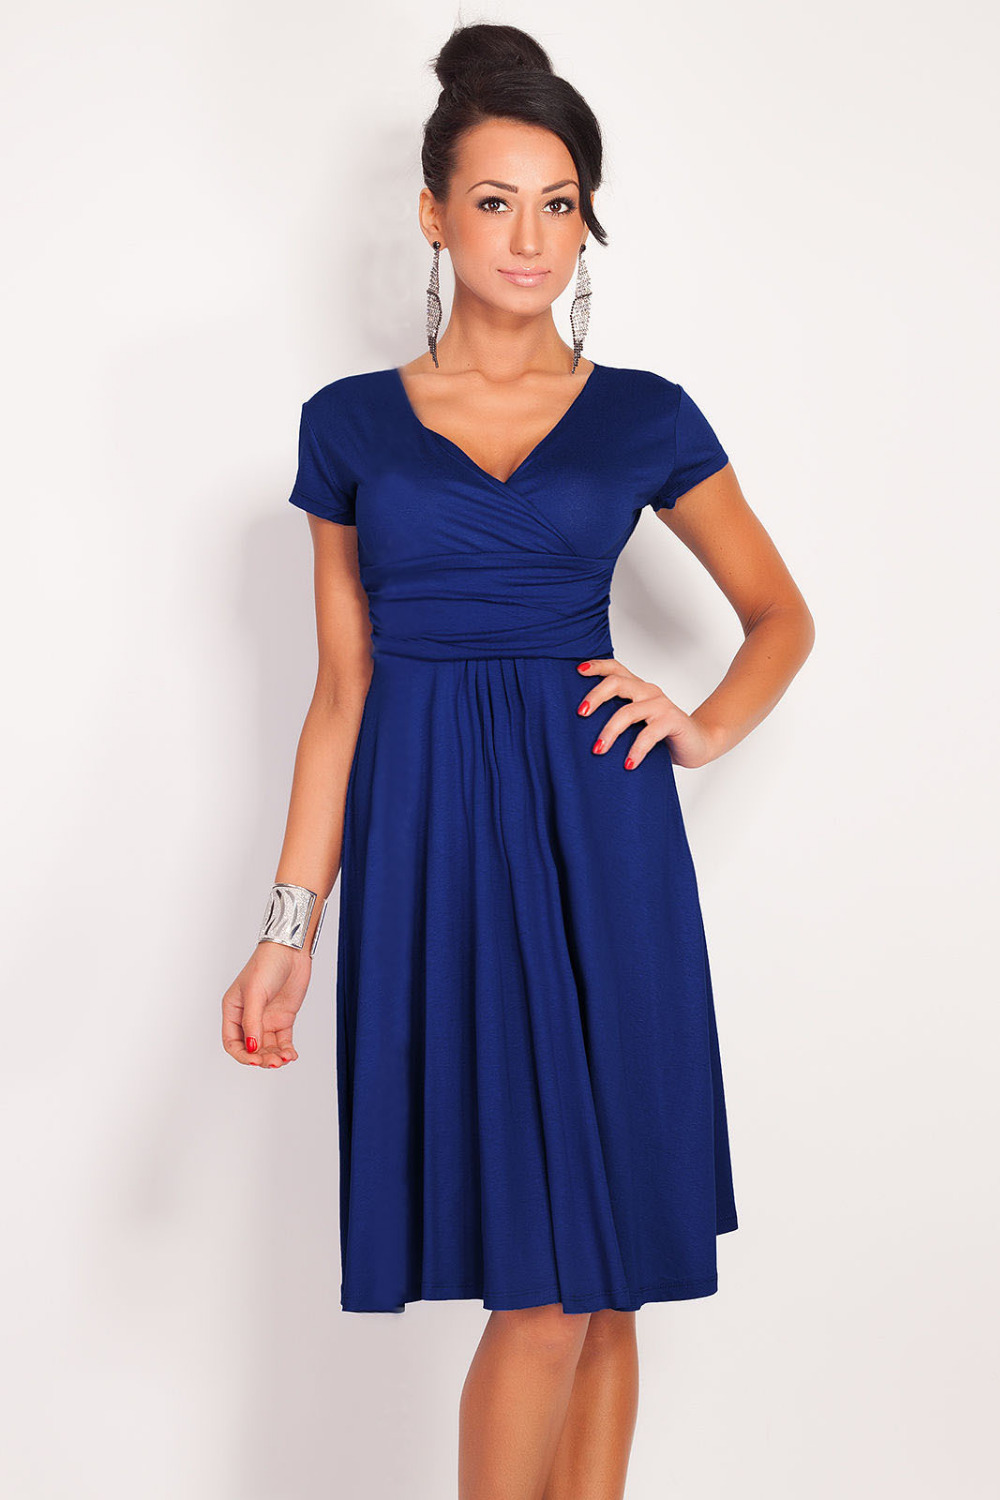 Compare Prices on Simple Summer Dresses- Online Shopping/Buy Low ...